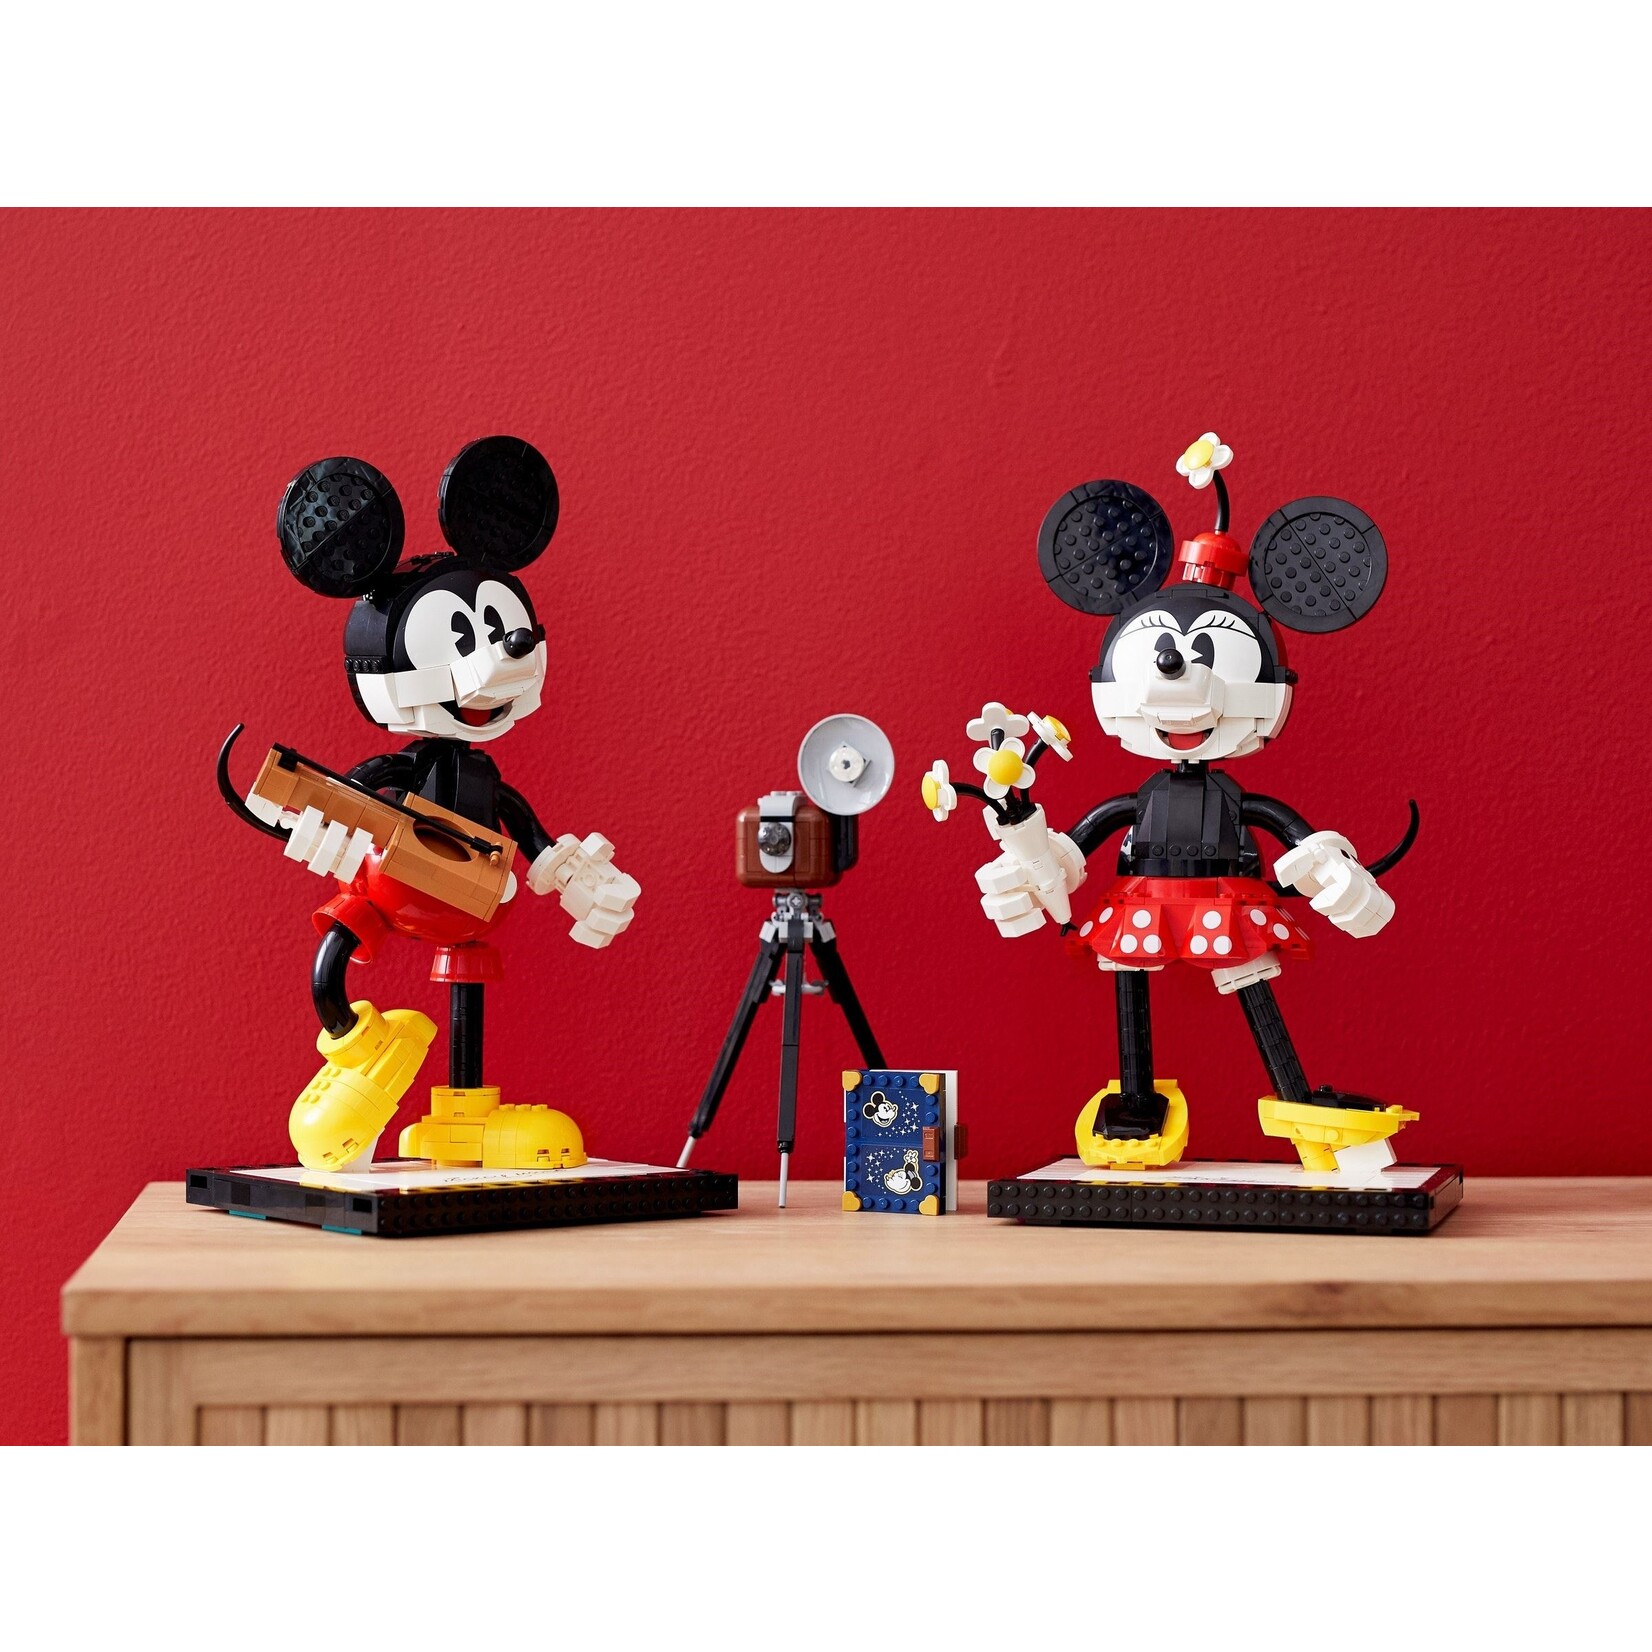 LEGO Mickey Mouse & Minnie Mouse personages om zelf te bouwen 43179